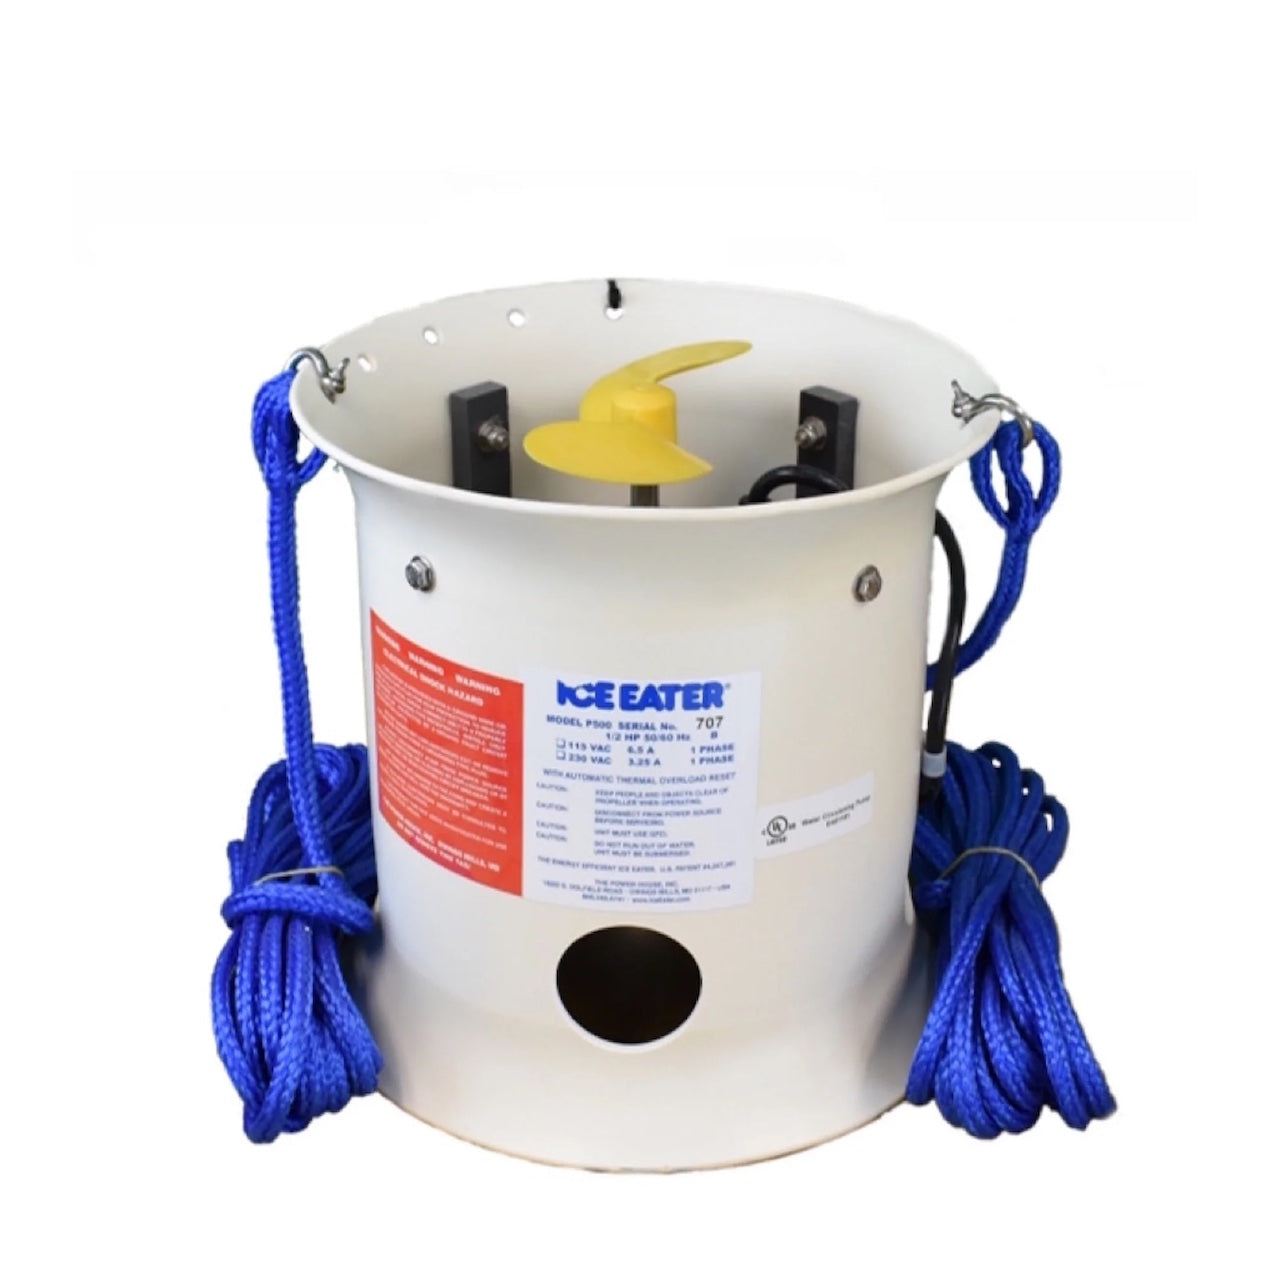 This is a full display of the Bearon Aquatics P500 Ice Eater - 1/2 Hp with blue ropes on either side attached to the main part colored off-white with a pastel yellow fan inside held by a black attachment.